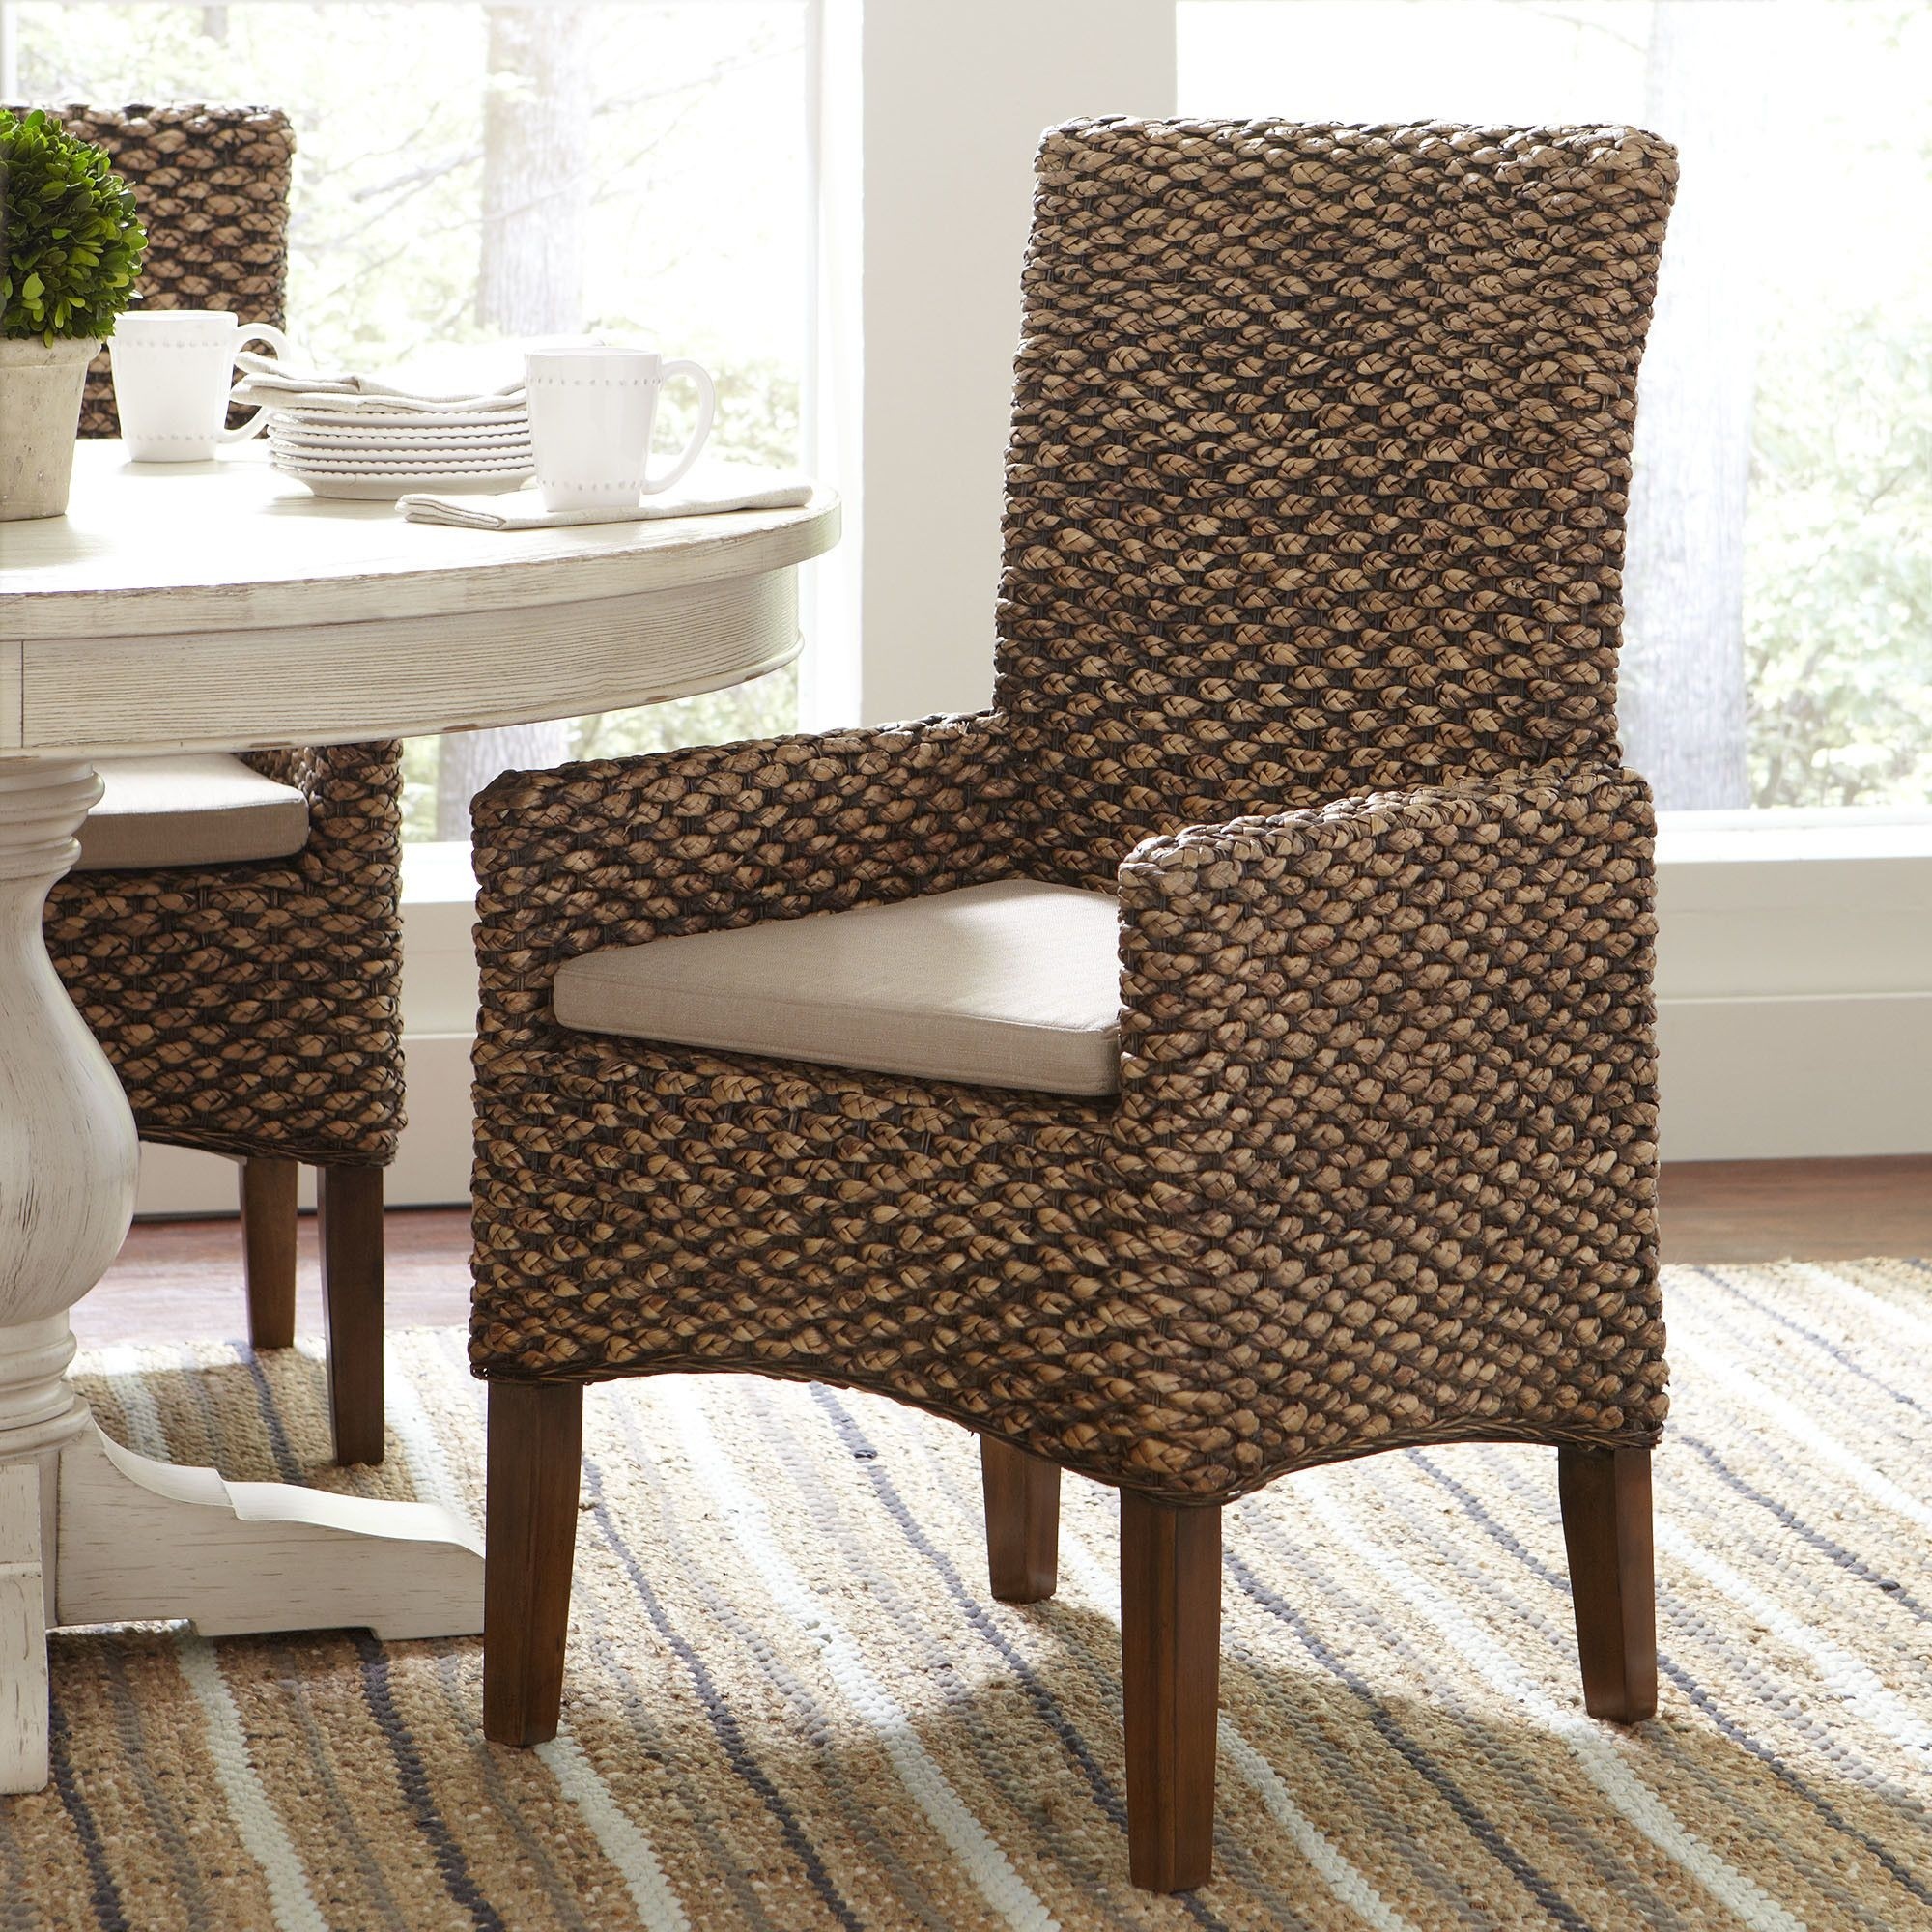 Woven Seagrass Arm Chairs (Set of 2)